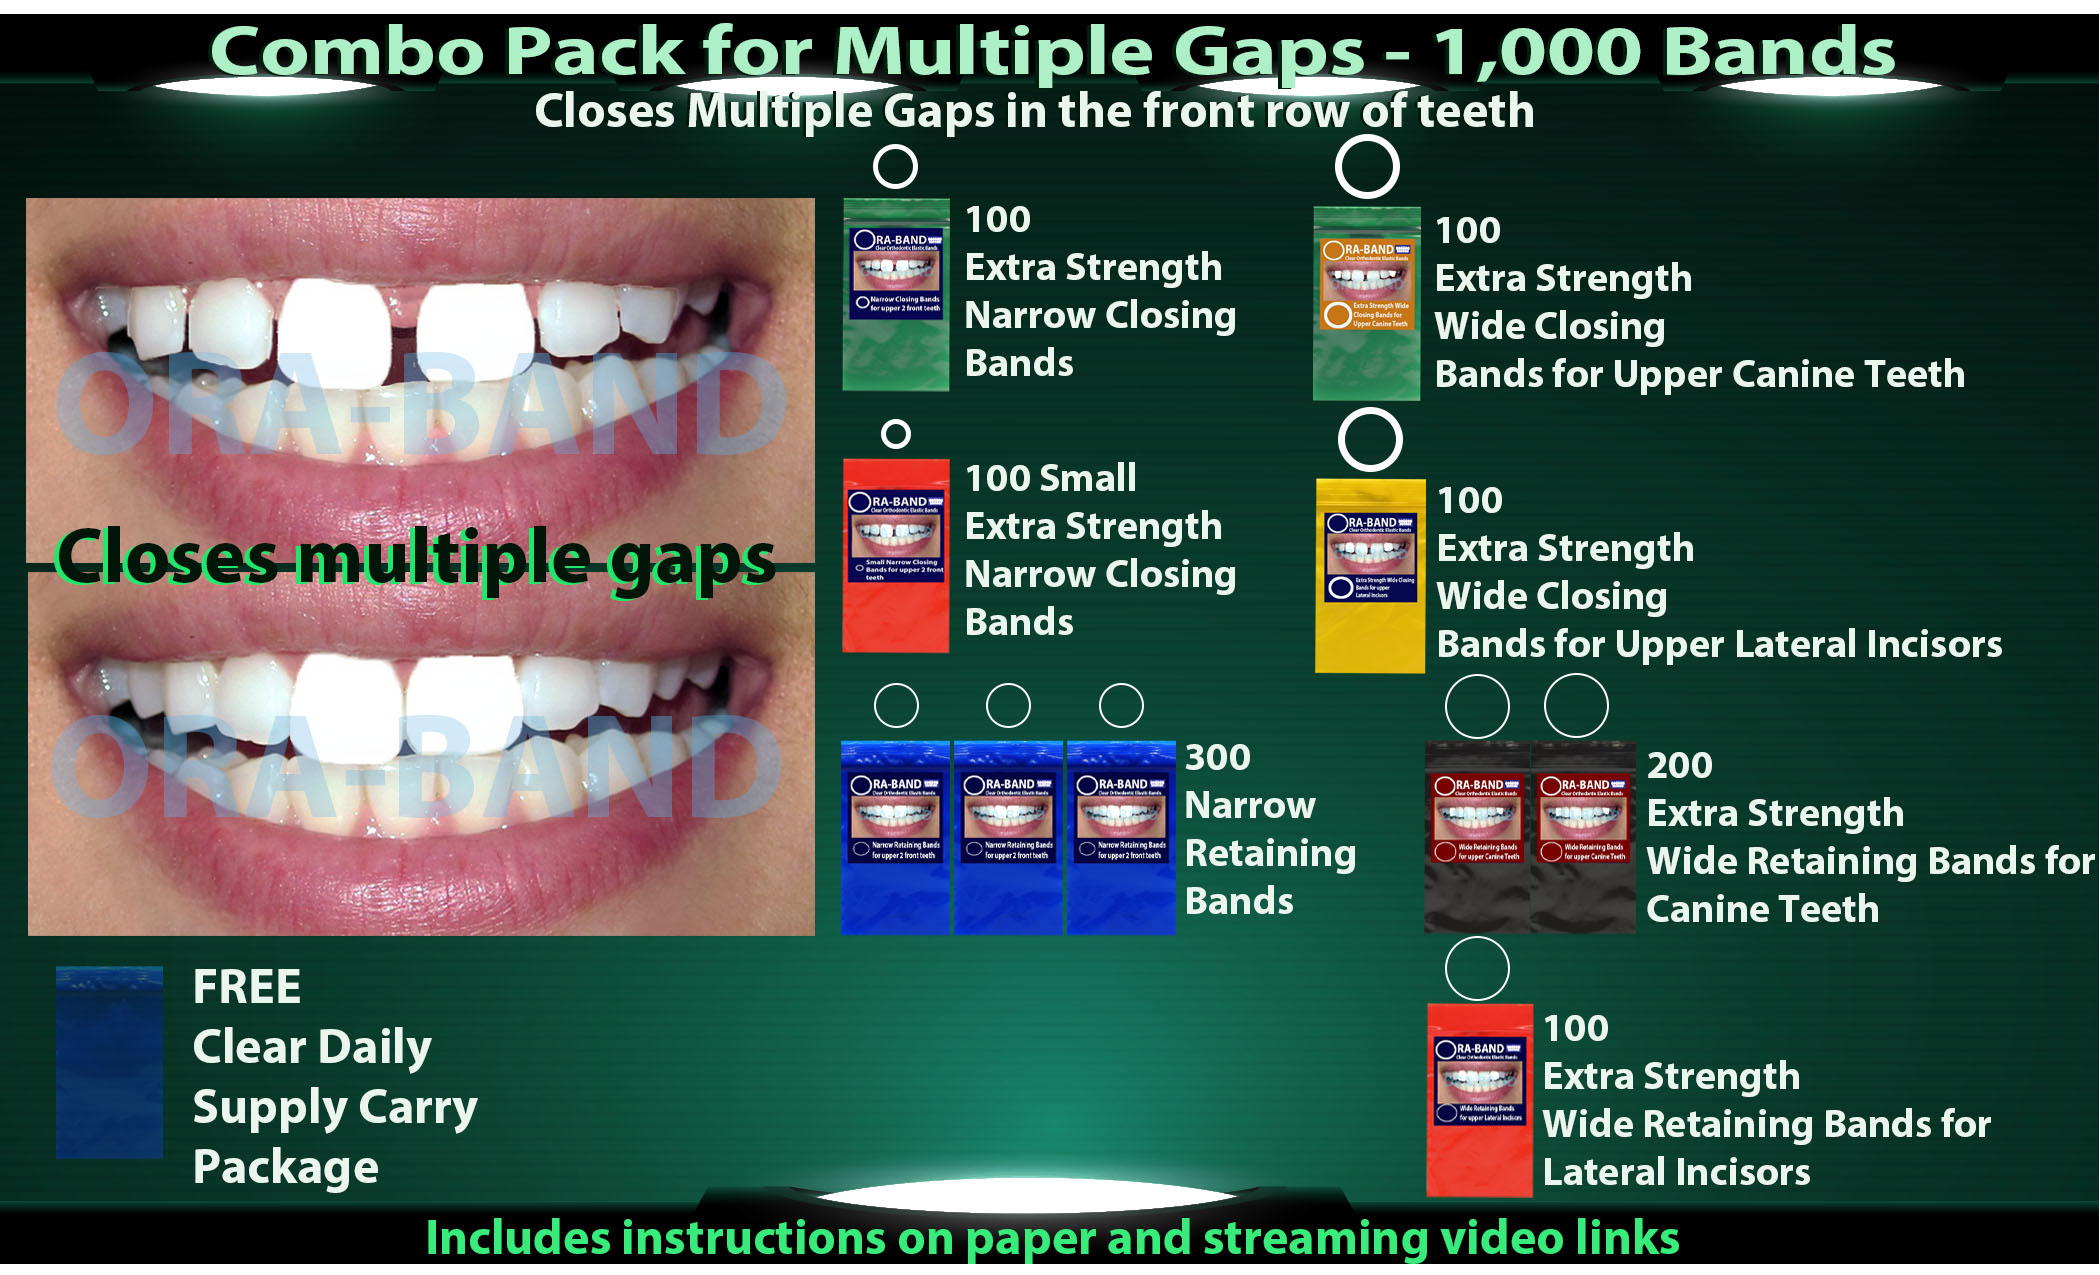 ORA-BAND 1,000 Band Combo Pack for Multiple Gaps in your front row of teeth